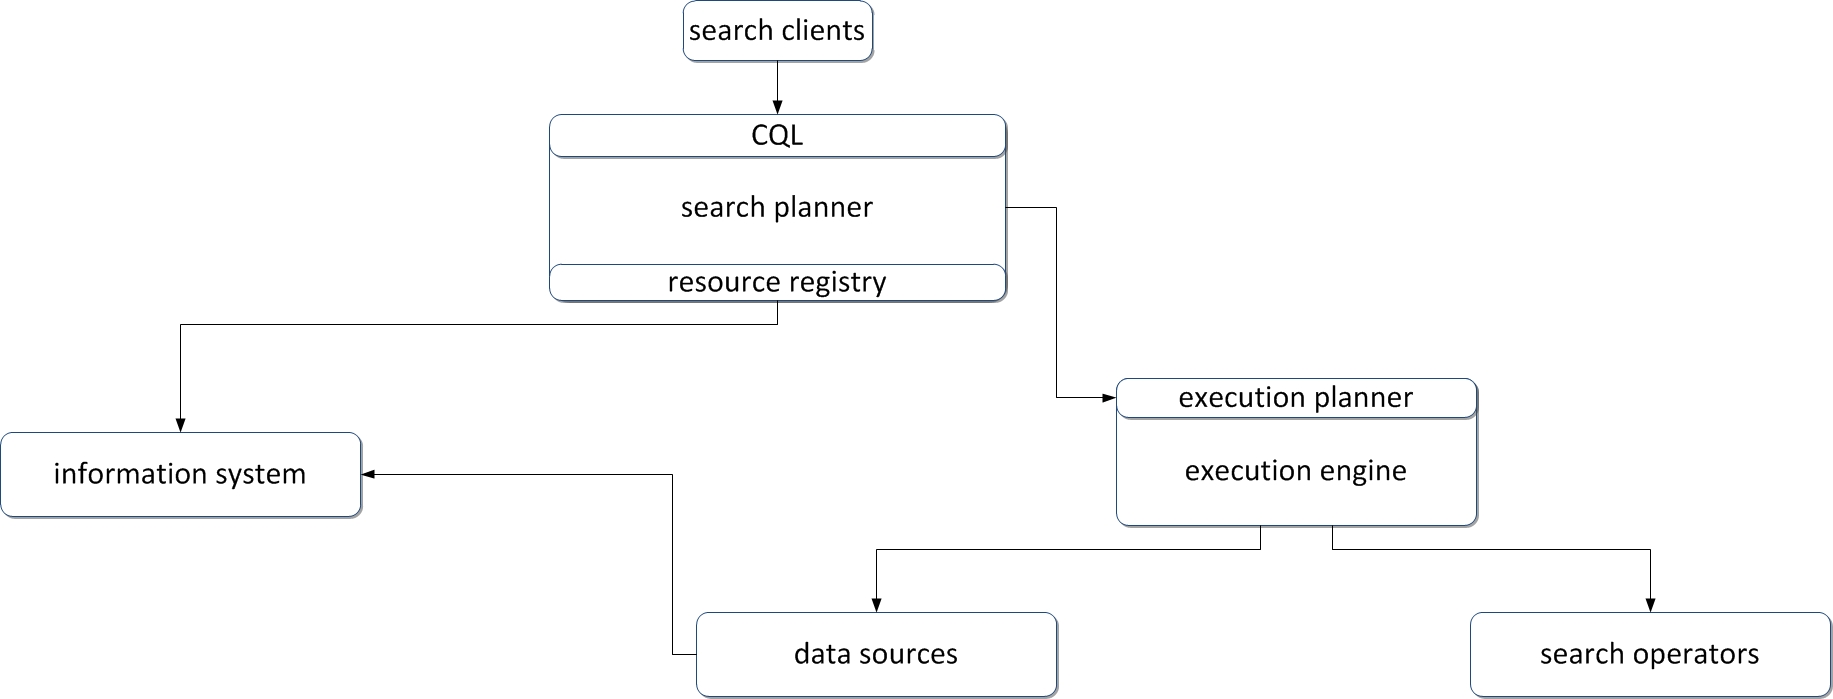 Search system architecture.jpg